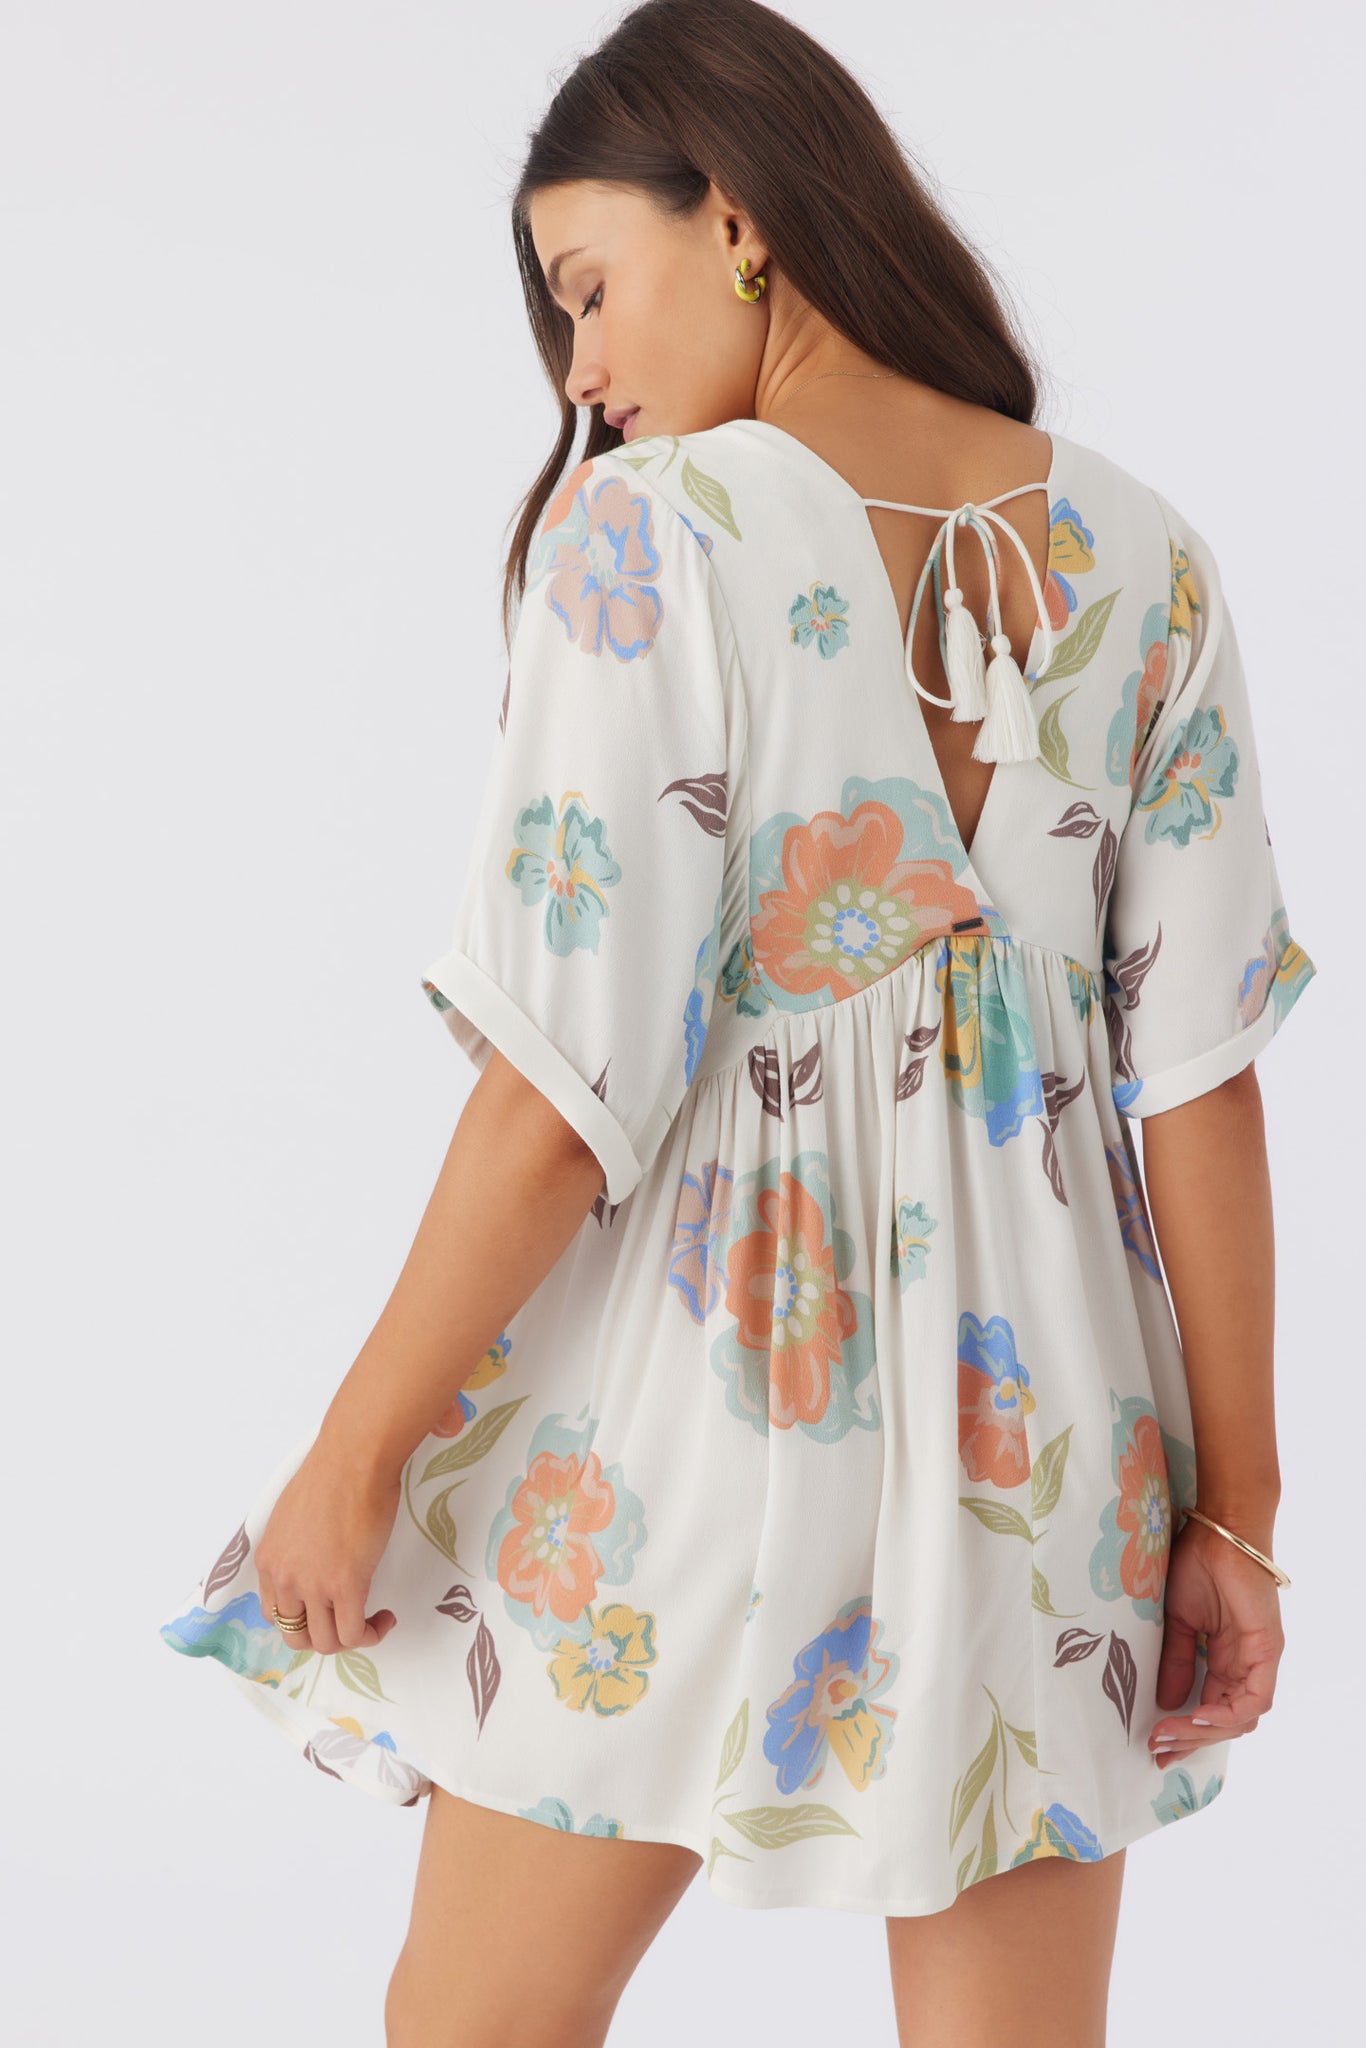 ROSEMARY NAAM FLORAL DRESS